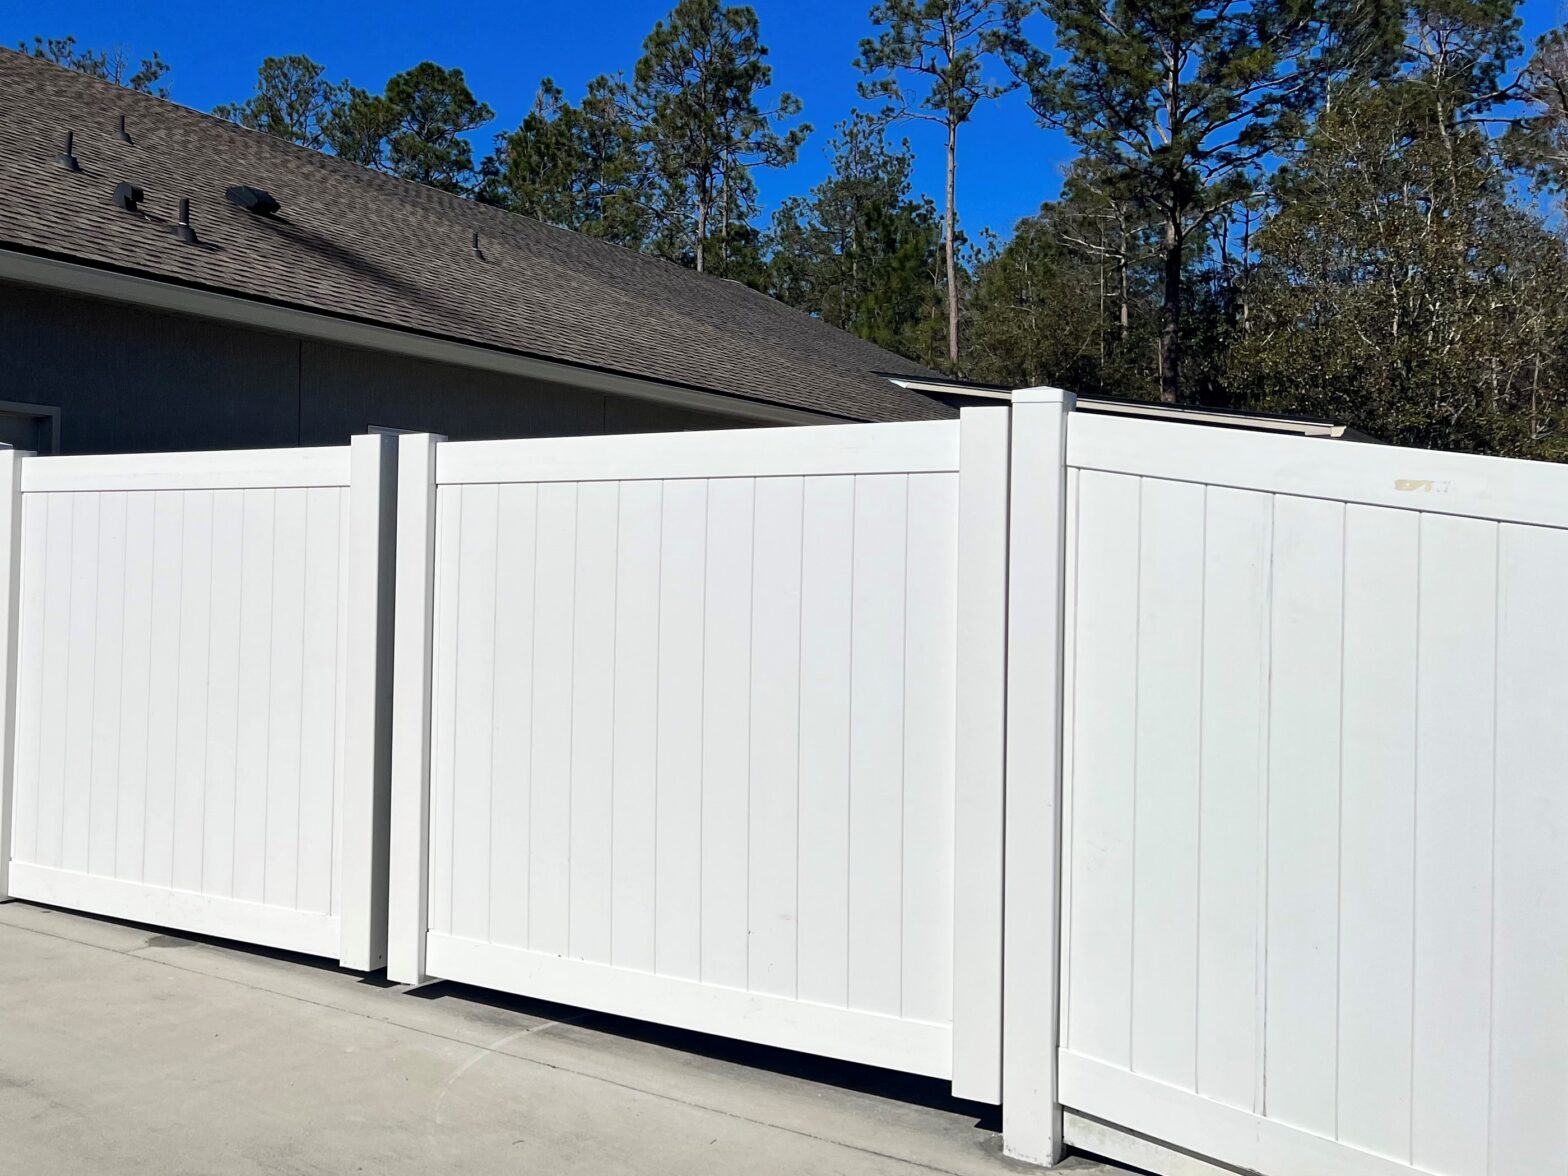 Photo of a Vinyl fence in St. Augustine, Florida by SWi Florida fence company